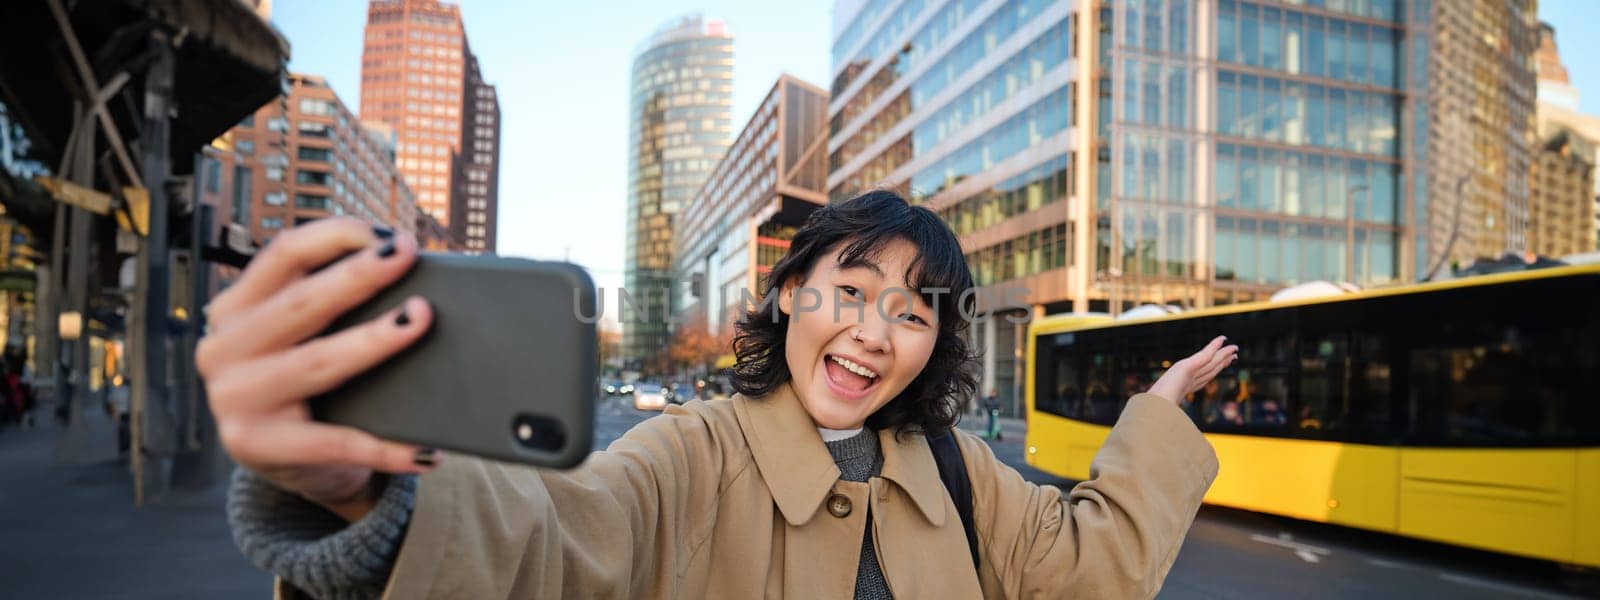 Upbeat asian girl takes selfie with smartphone in city centre, showing something behind her with smiling face. Tourist goes sightseeing.